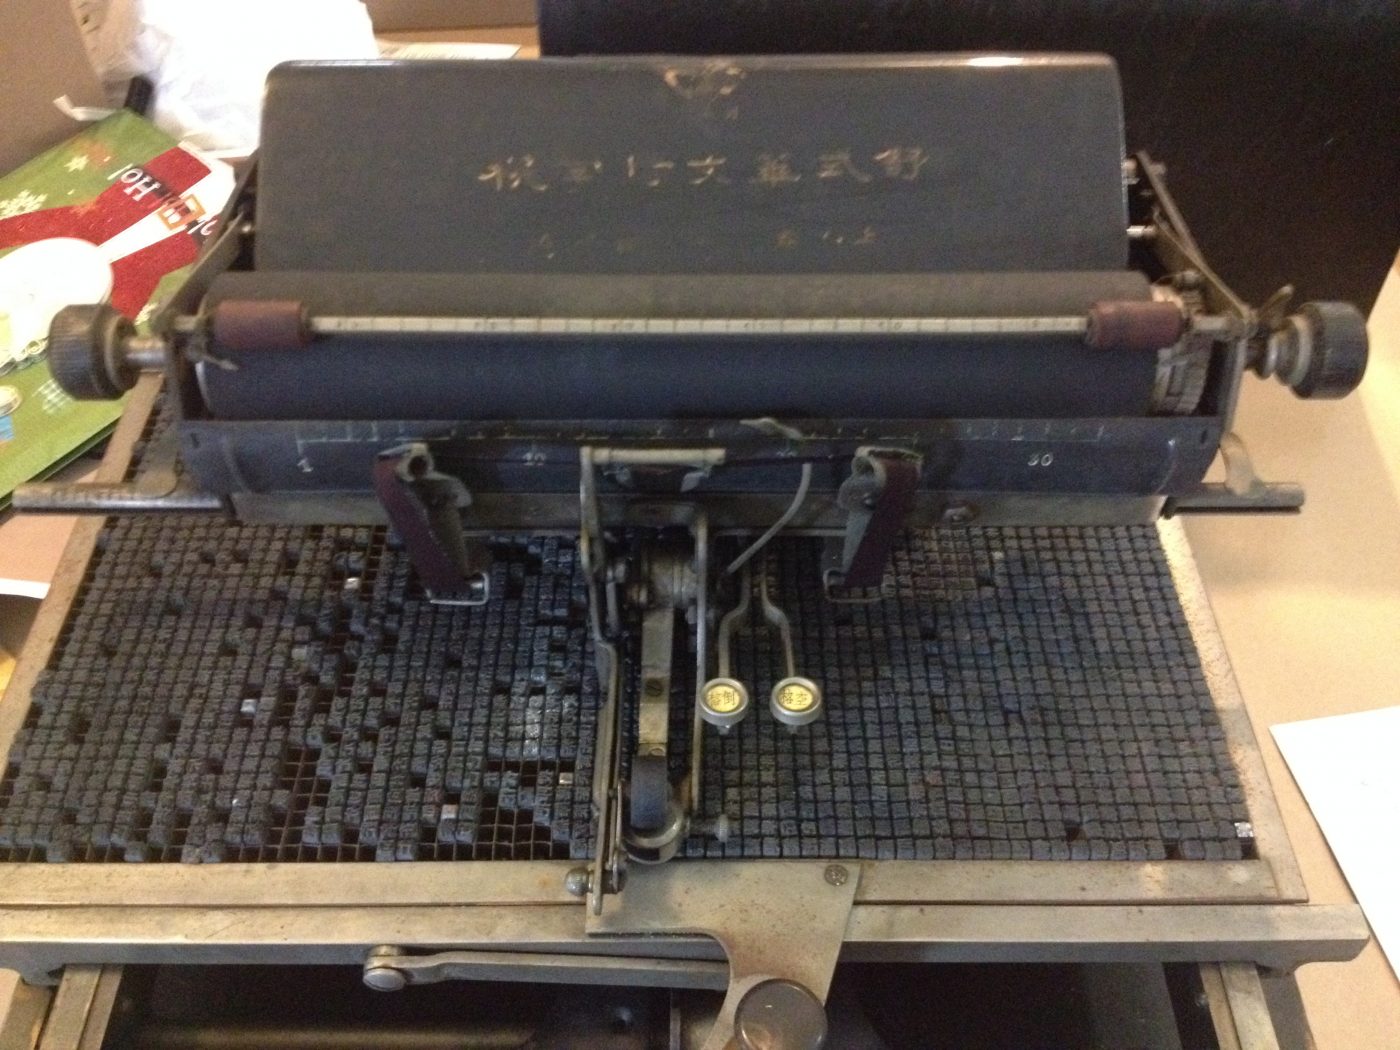 30 August 2019 Posted.
Chinese typewriter, Courtesy of David and Lisa Tang--In memory of Ho Poy Sing, Museum of Chinese in America (MOCA) Collection.
舒式华文打字机，David and Lisa Tang捐赠，纪念Ho Poy Sing，美国华人博物馆（MOCA）馆藏